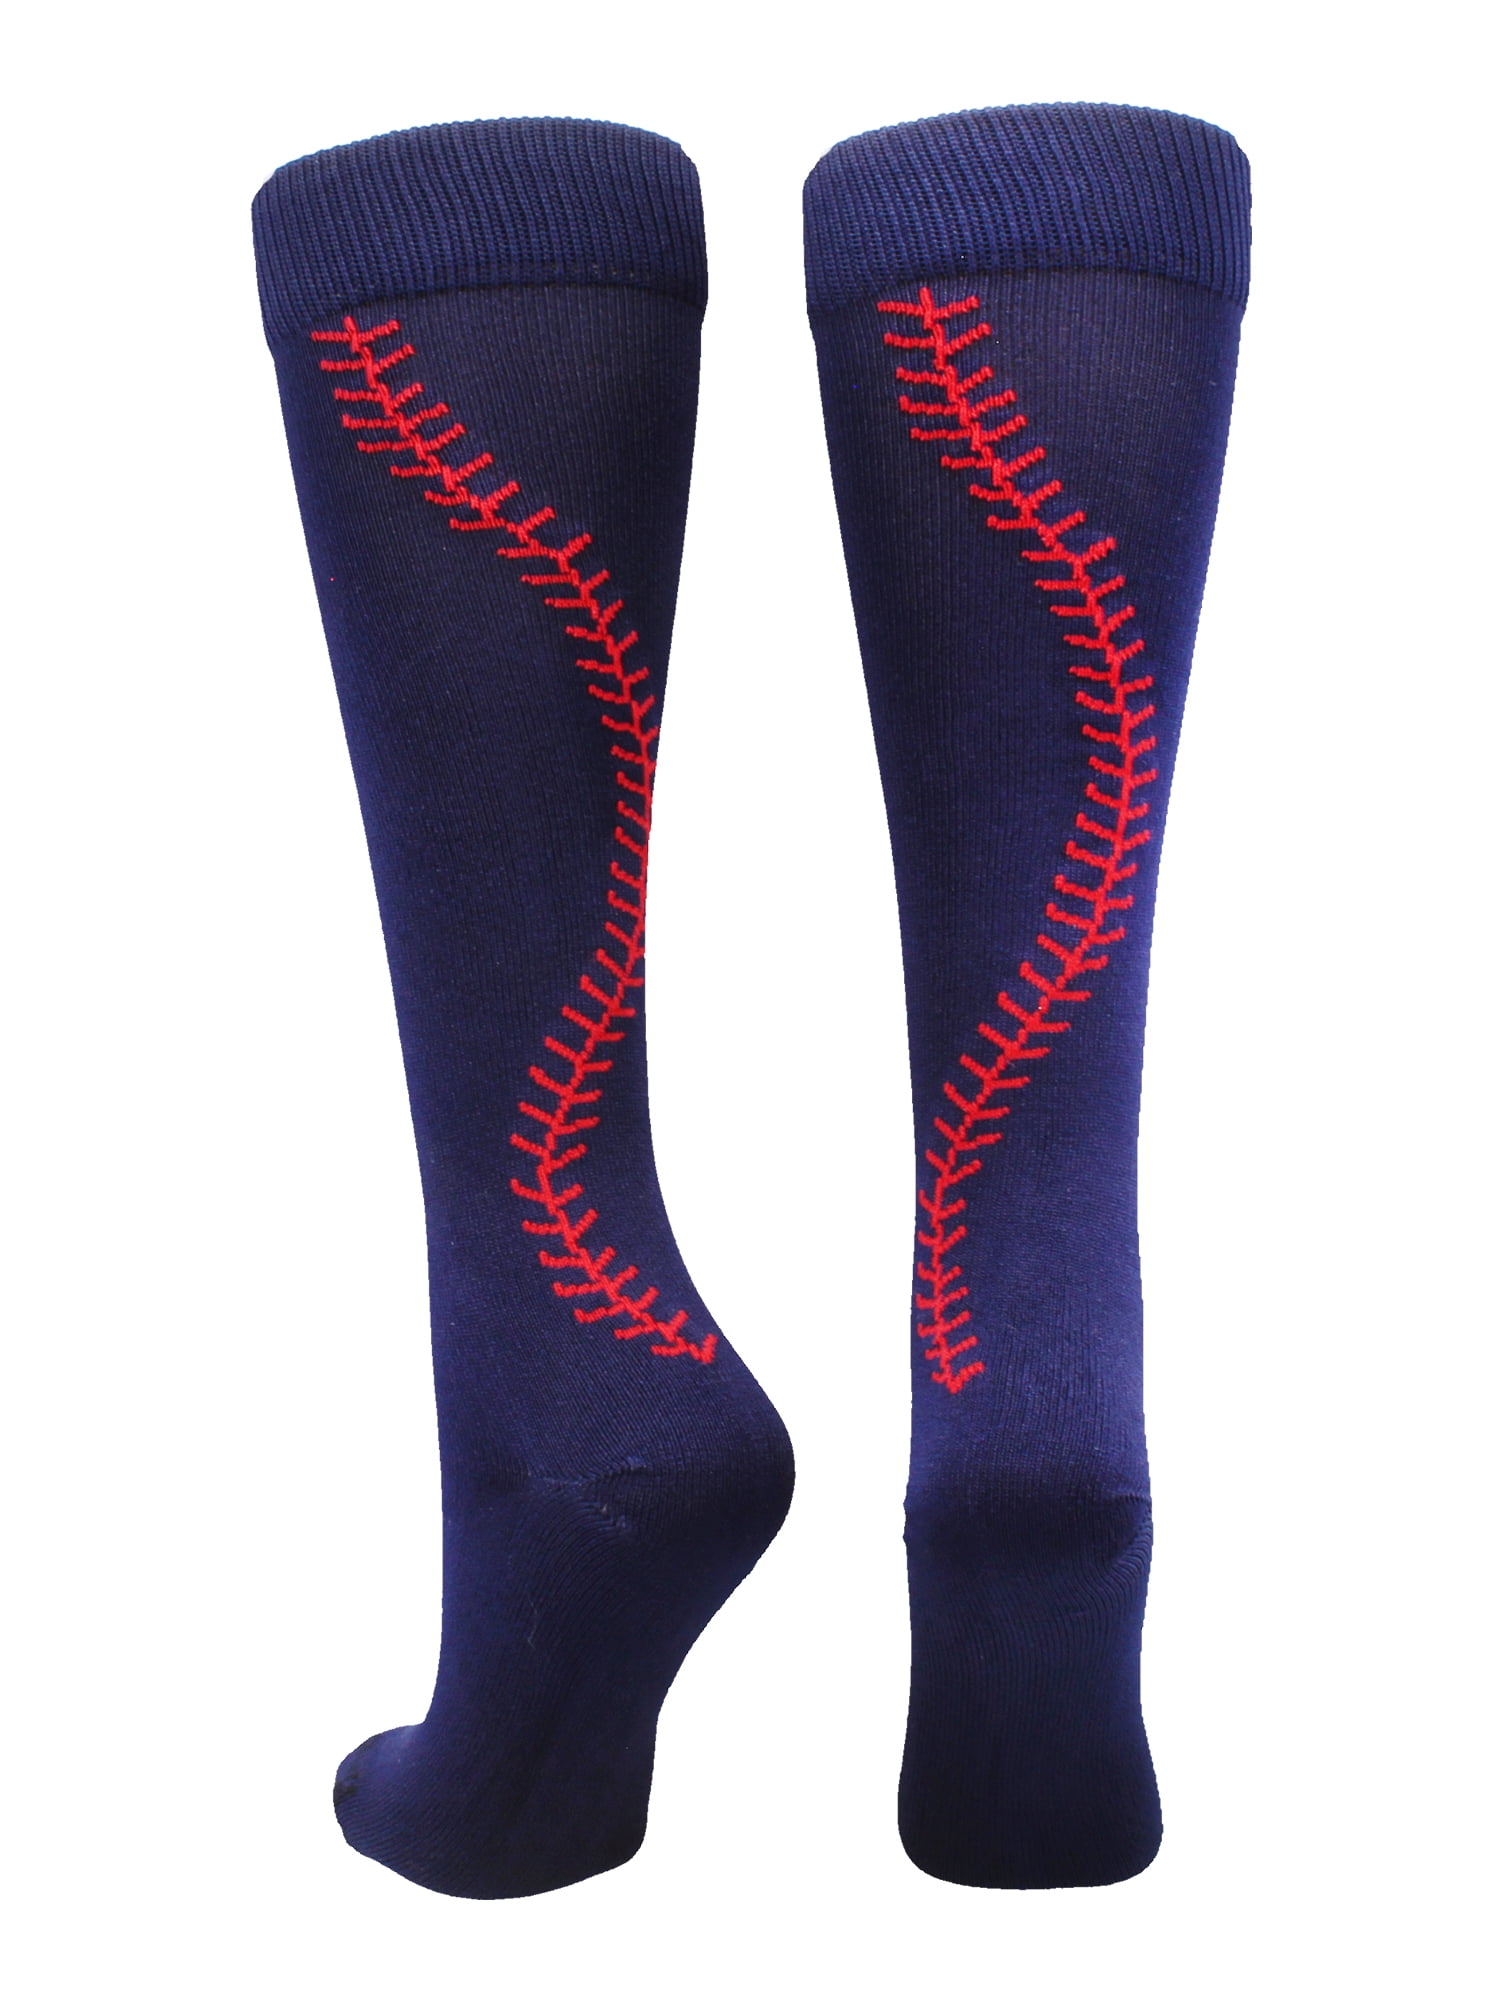 Youper Softball Socks w/ Stitches for Youth Girls & Adult Women 2 Pairs 